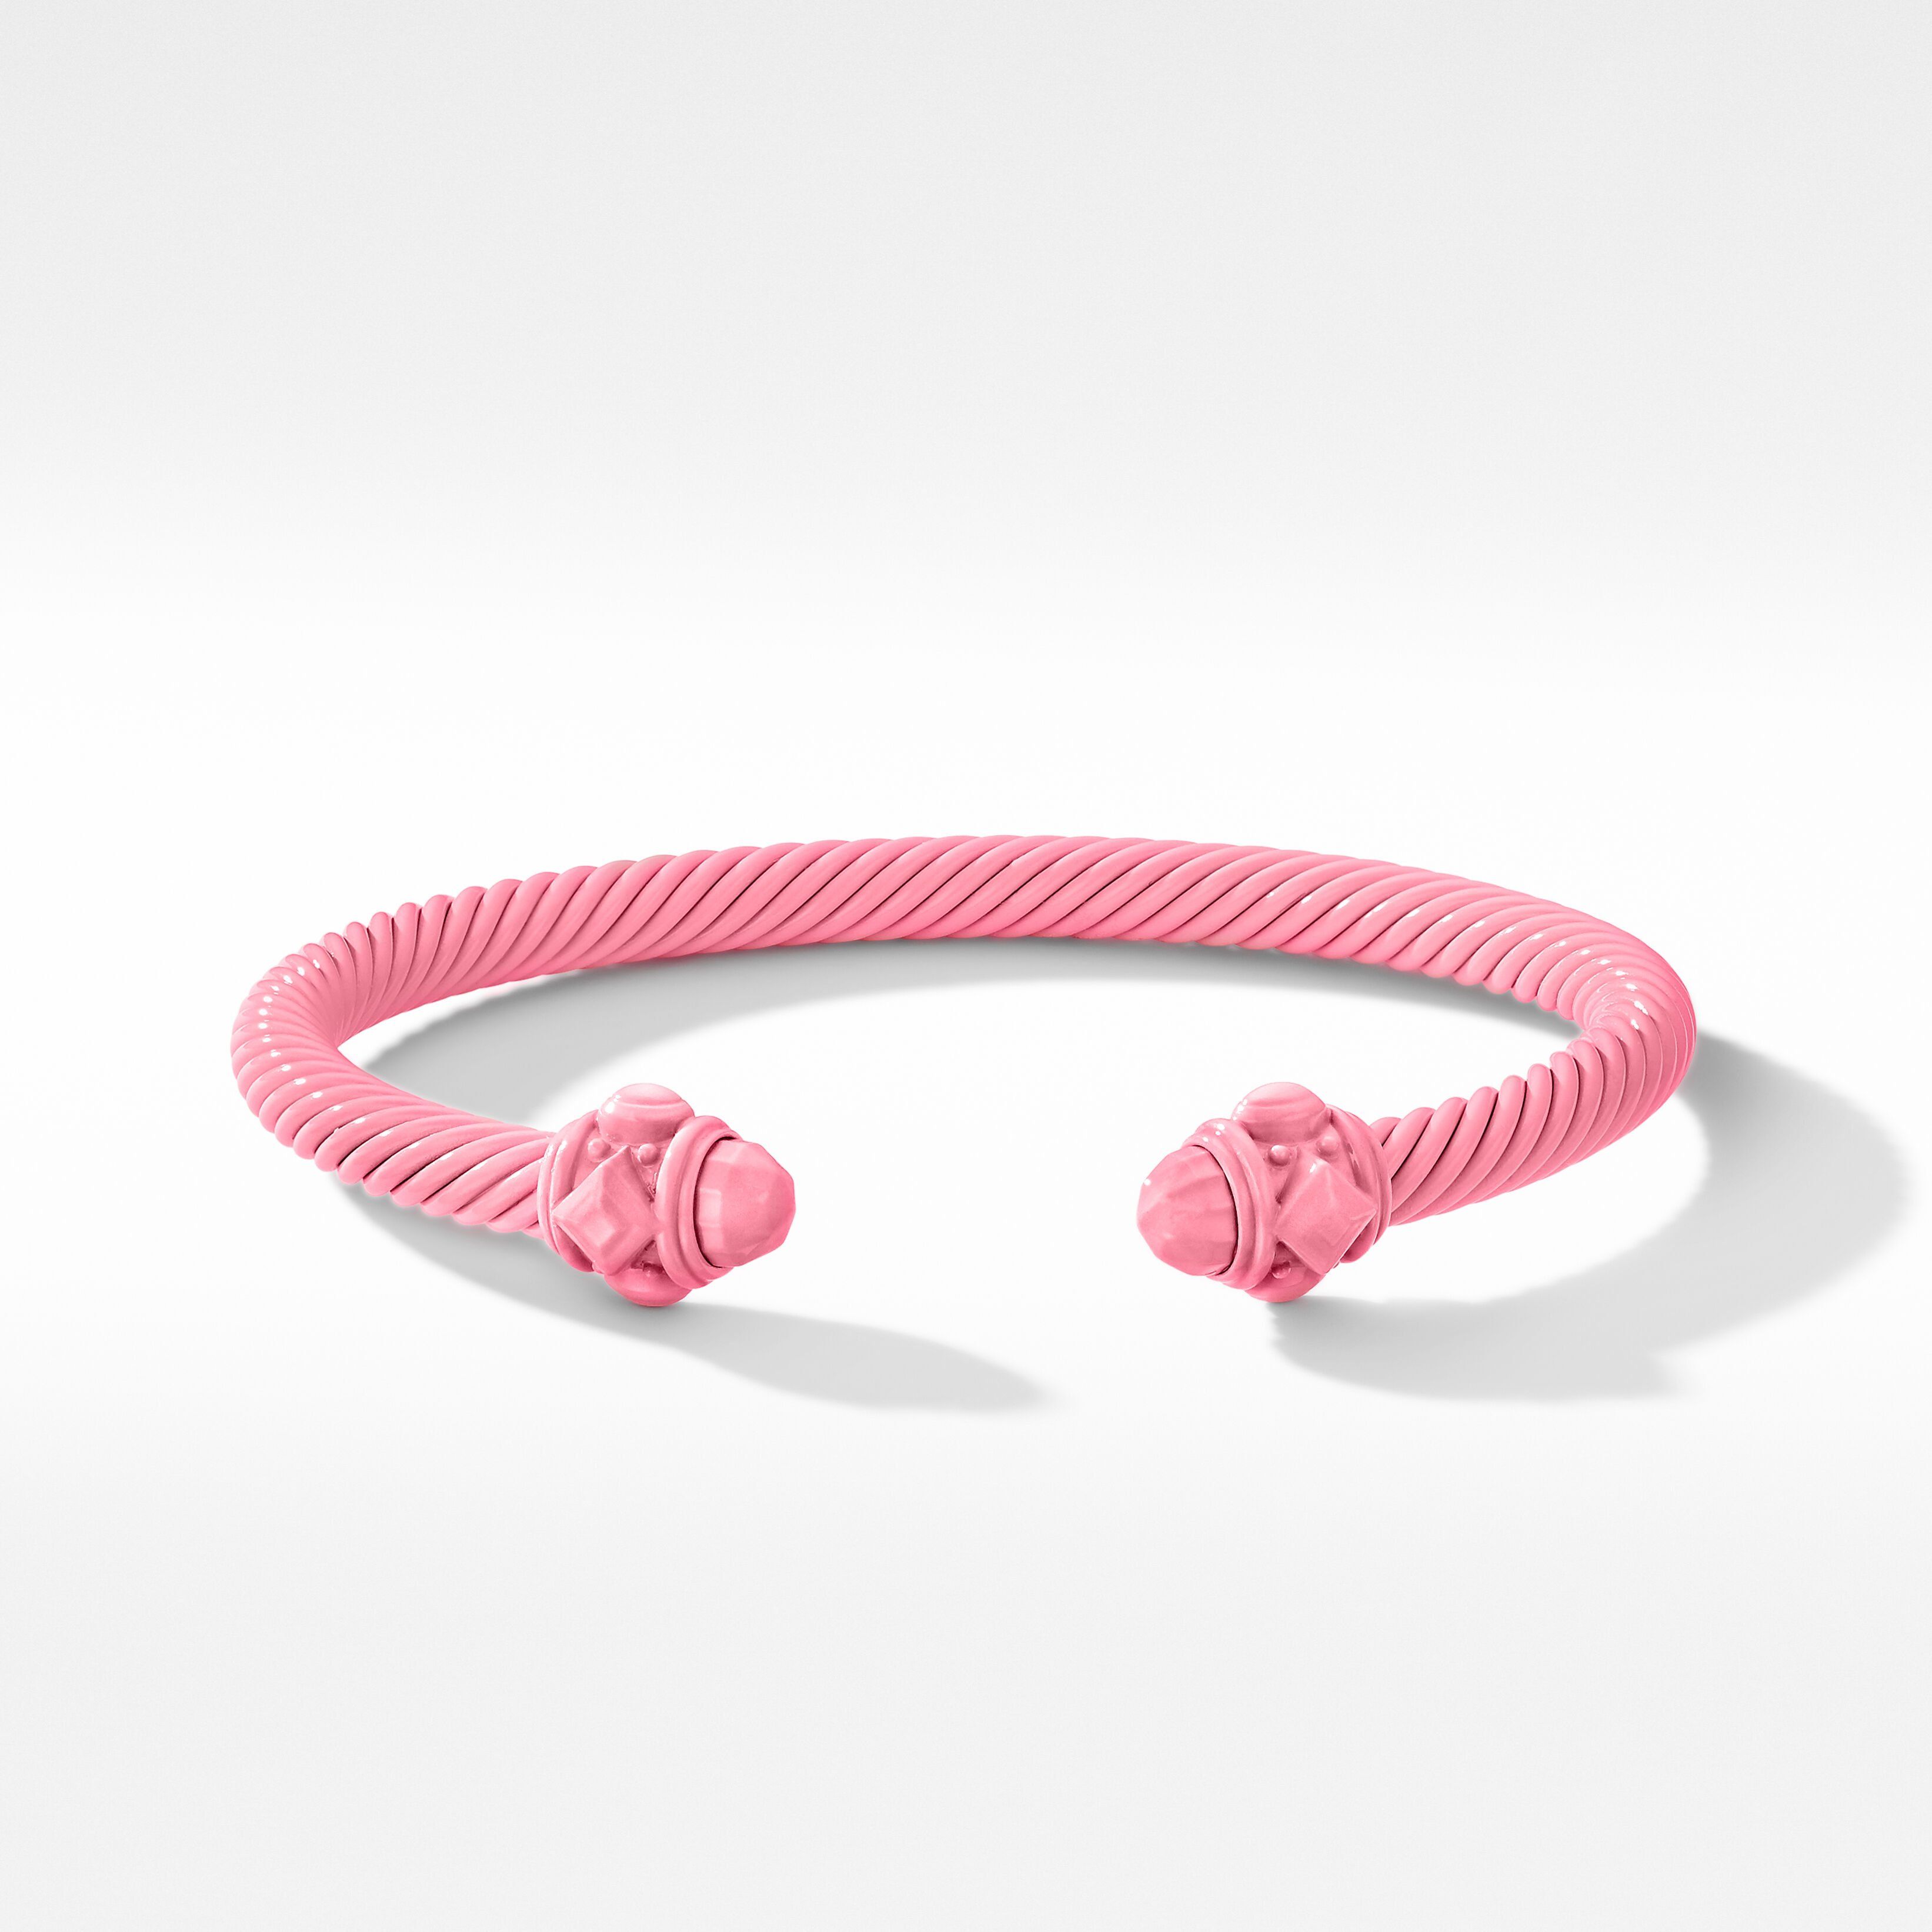 The Cable Collection®
for
Women | David Yurman